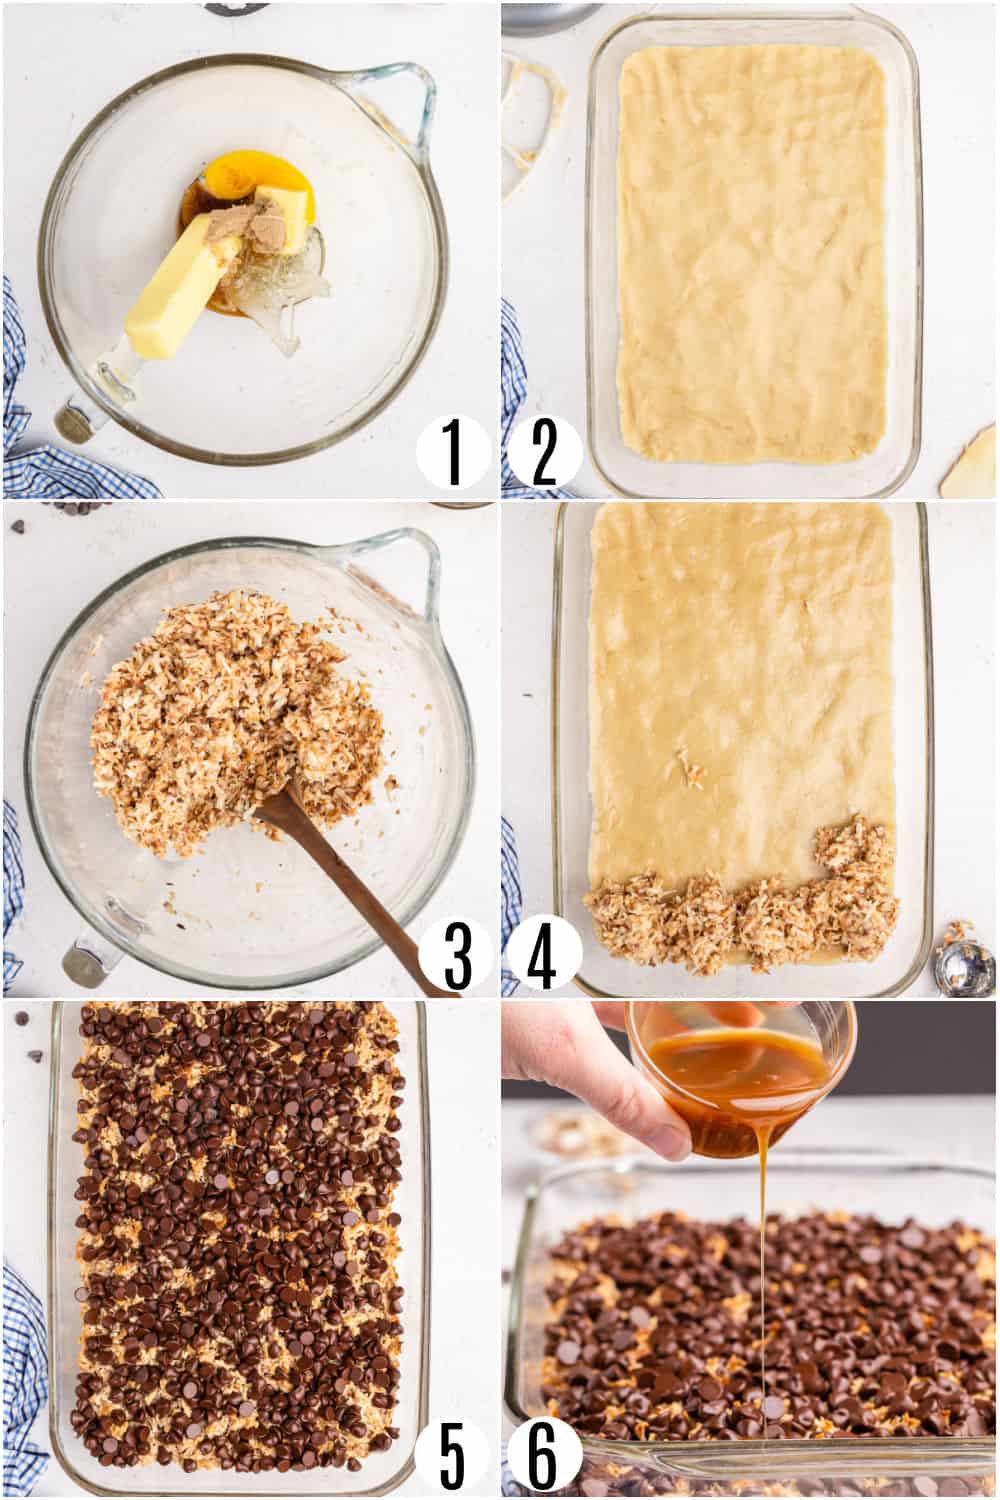 Step by step photos showing how to make coconut almond bars.